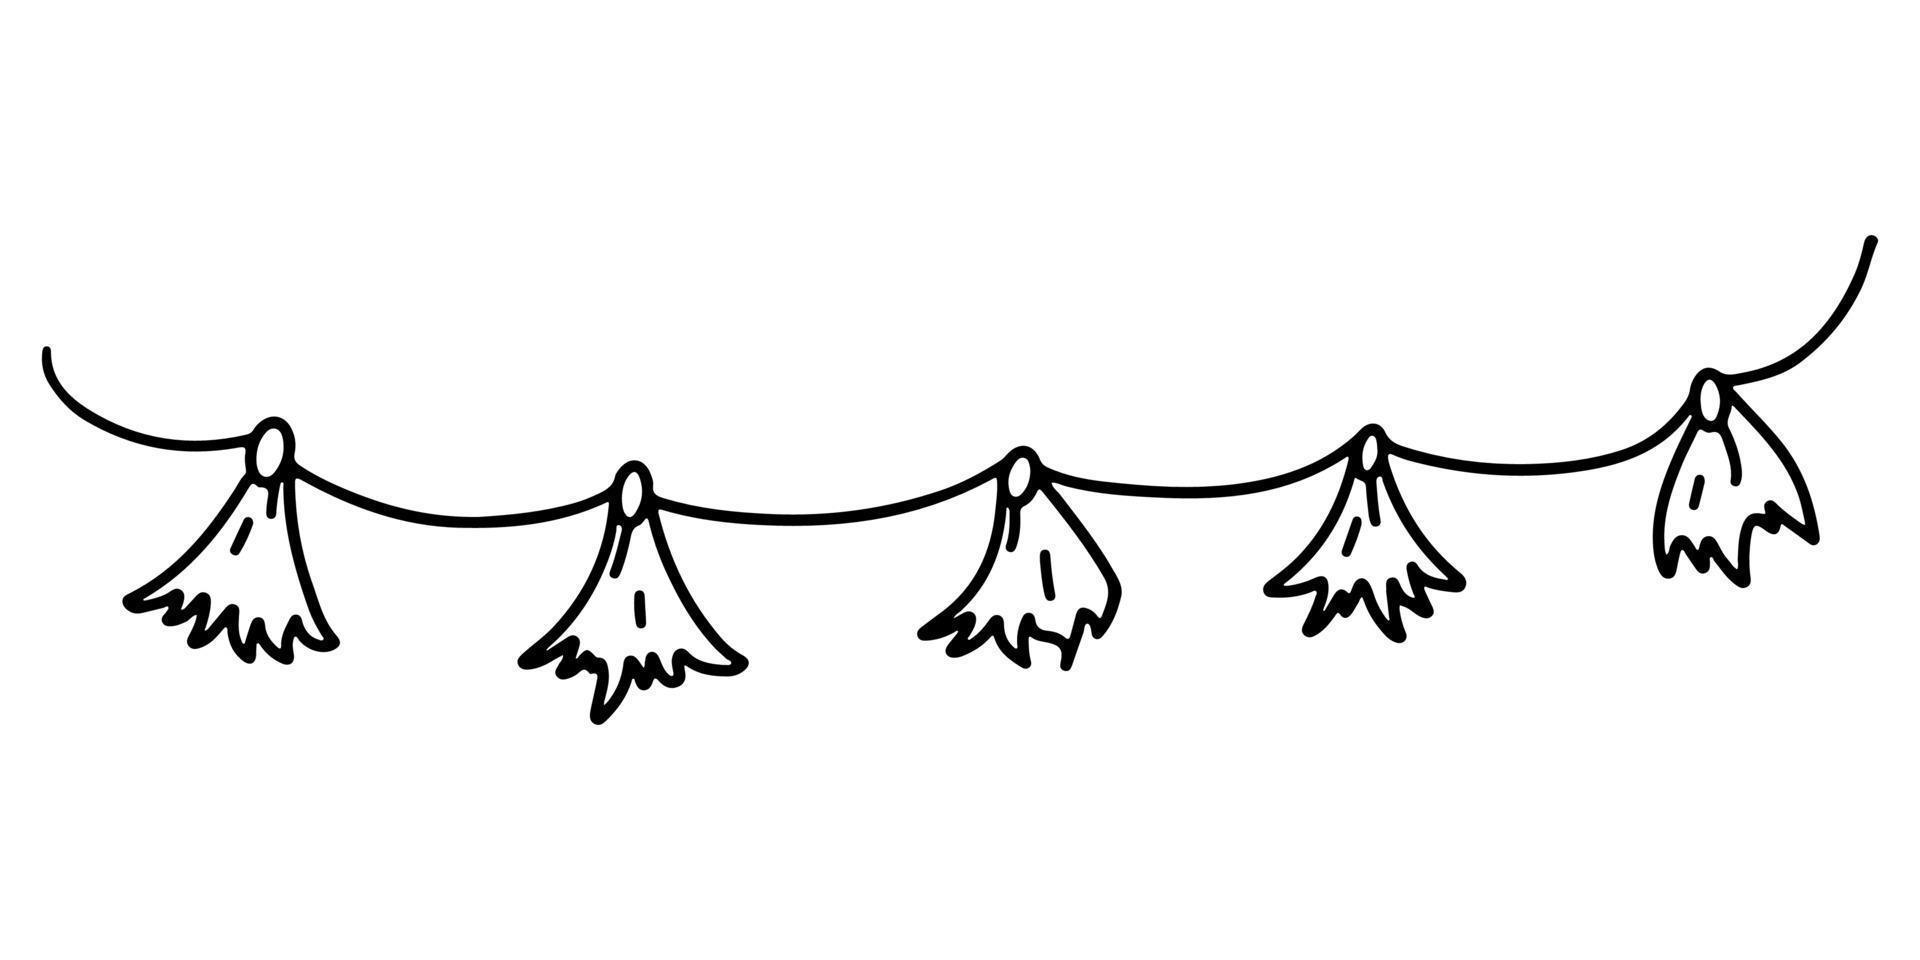 Decorative festive garland isolated on white background. Vector hand drawn illustration in doodle style. Use it for greeting cards, decorations, logo.